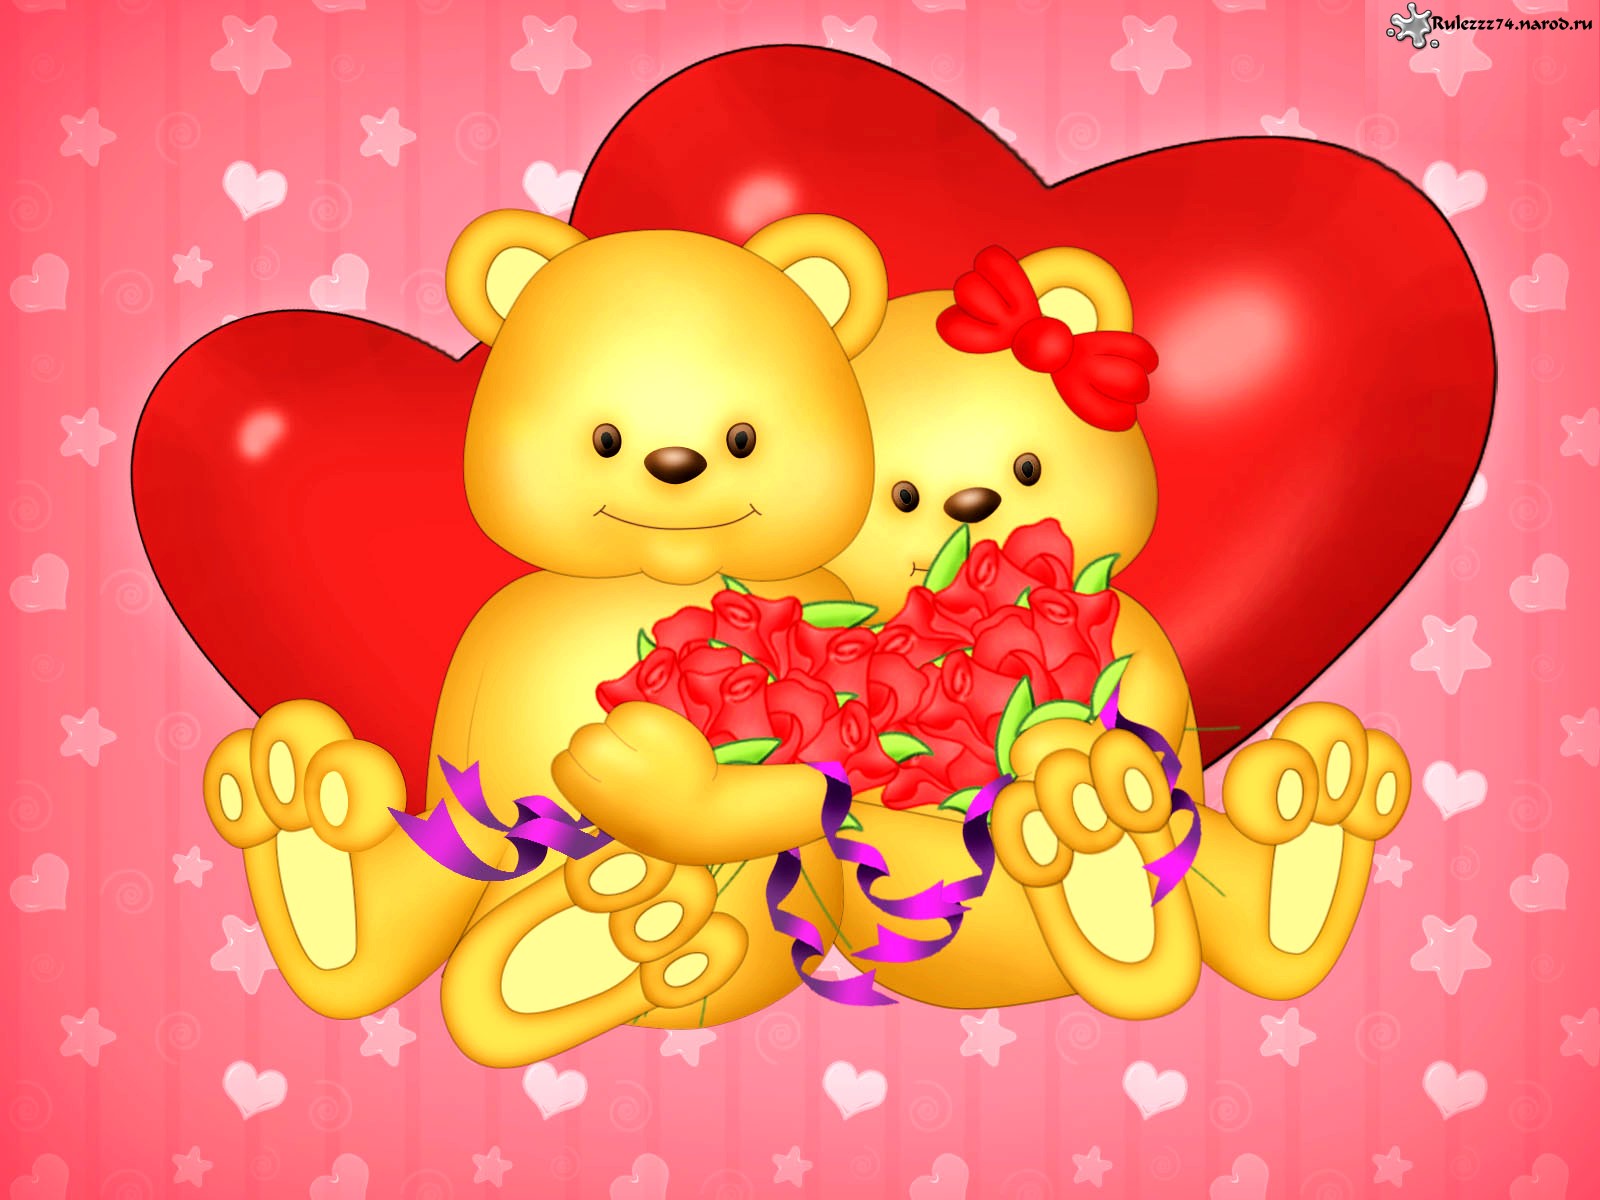 Wallpapers Teddy bear Image #89550 Download